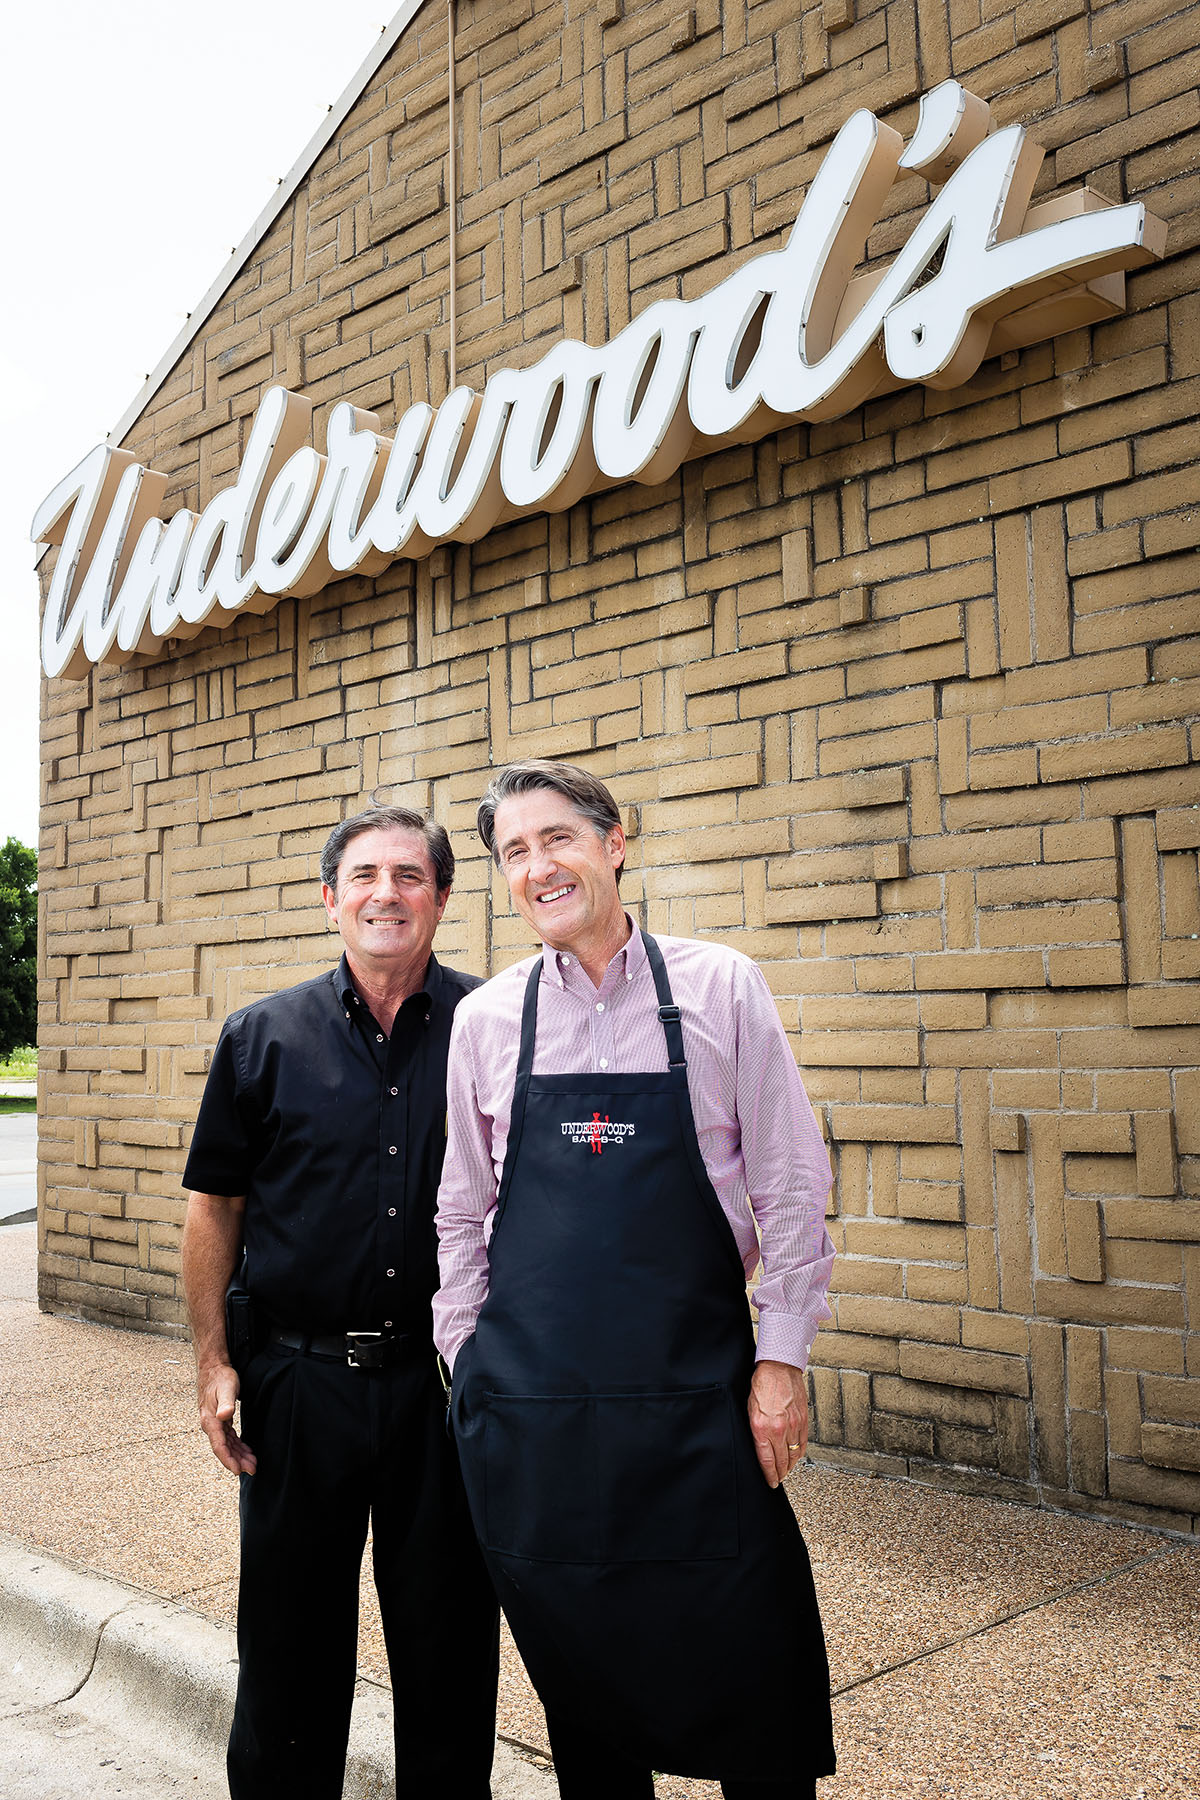 Two men, one in an apron, stand out front of a building with a sign reading "Underwood's"